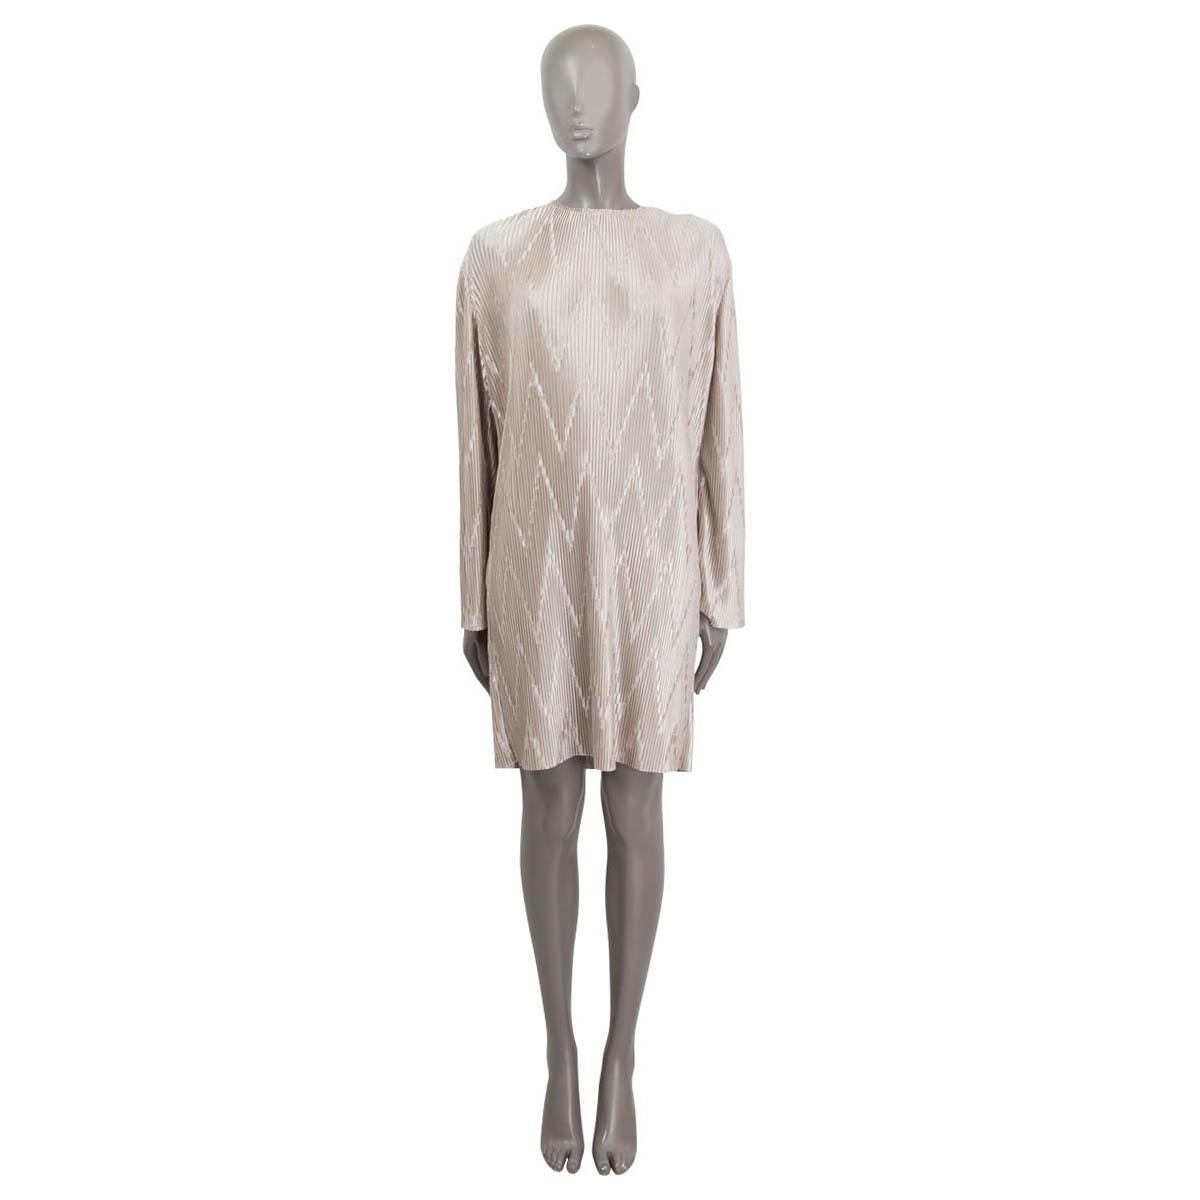 100% authentic Givenchy zig-zag plissé jersey dress in silver polyester (100%). Opens with a zipper and a hook at the shoulder. Unlined. Has been worn and is in excellent condition.

Resort 2019

Measurements
Tag Size	36
Size	XS
Shoulder Width	43cm